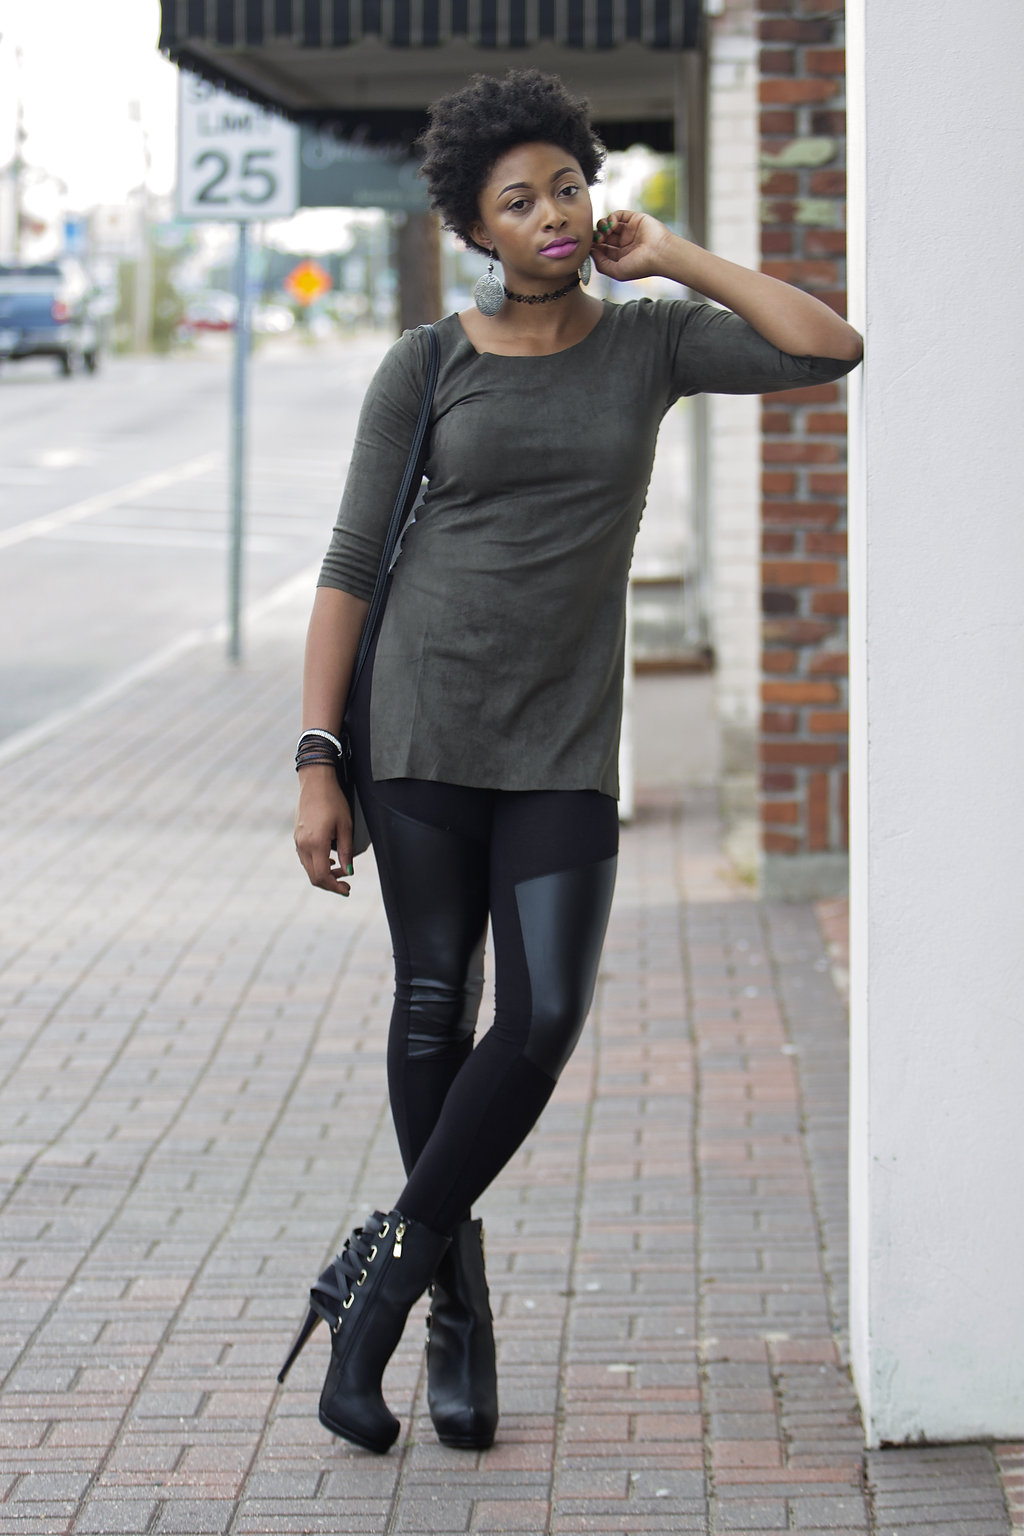 how to wear faux leather leggings, candace hampton